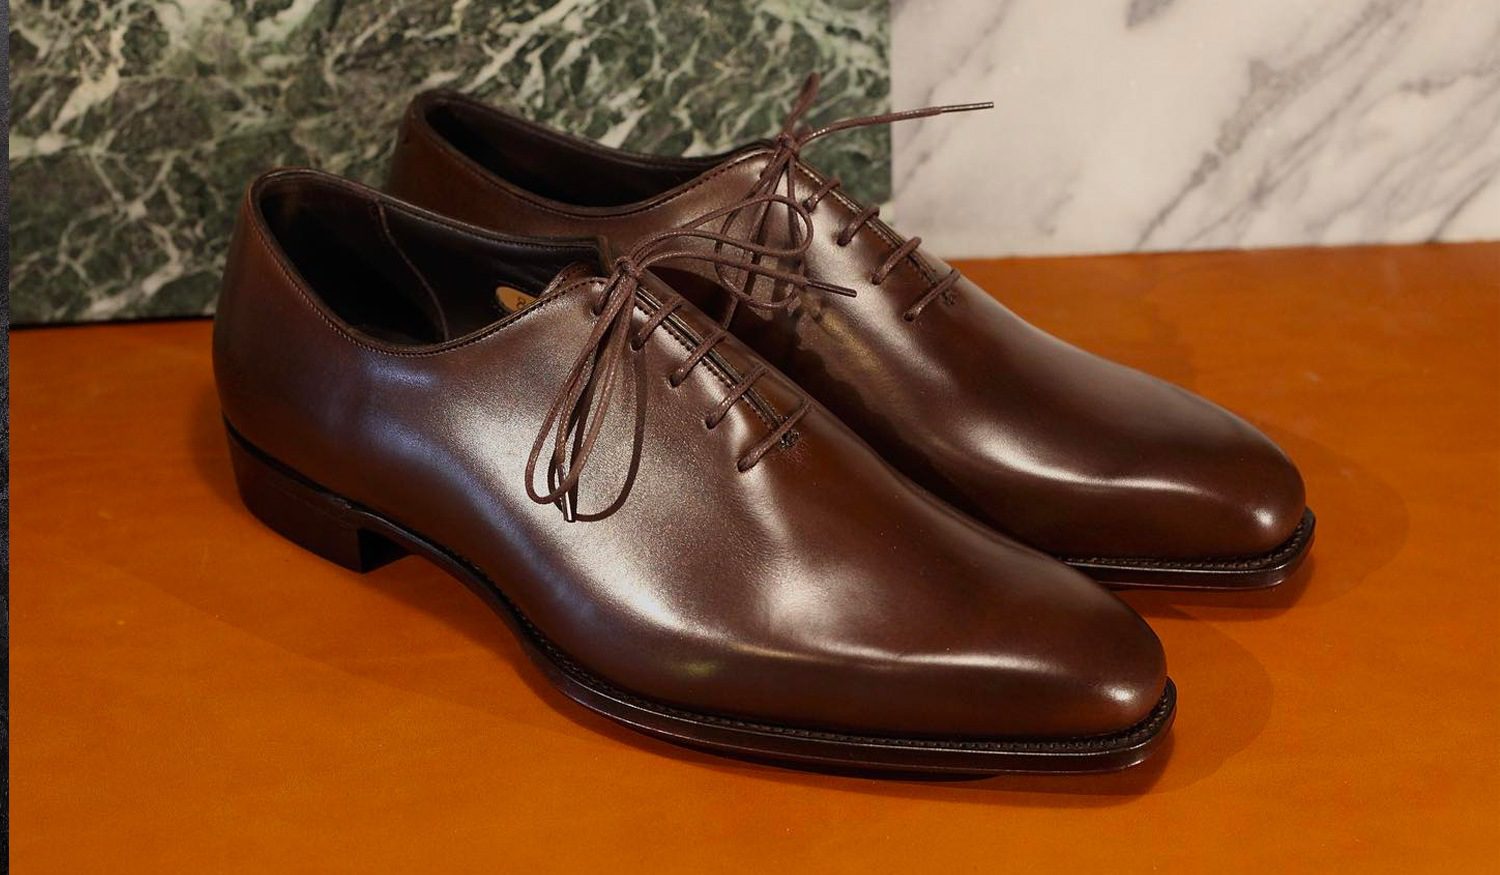 top leather shoe brands